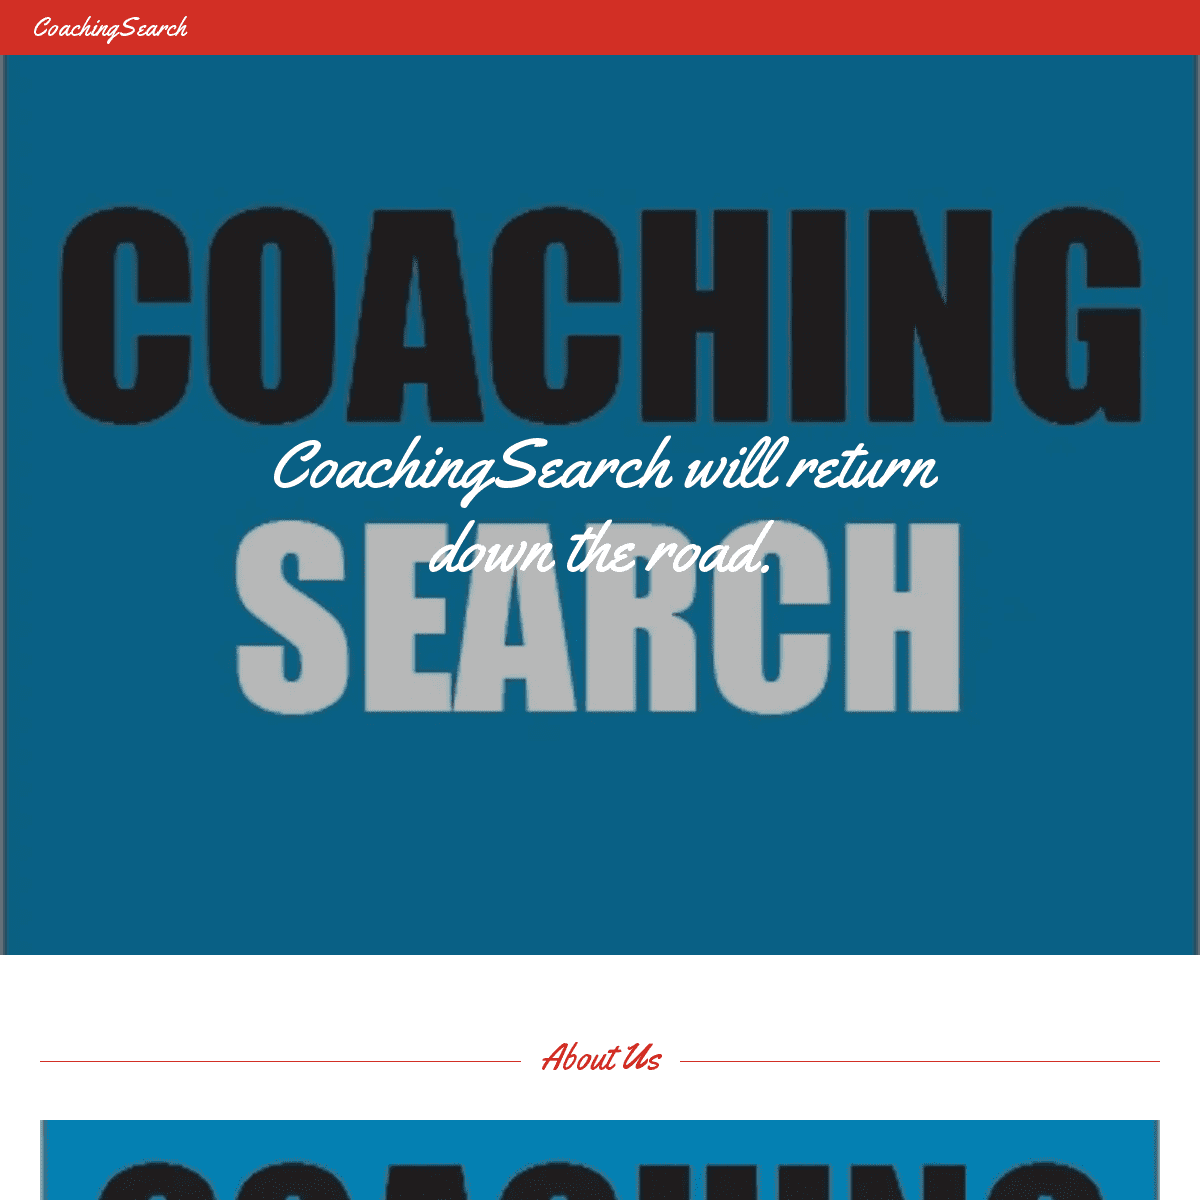 A complete backup of https://coachingsearch.com